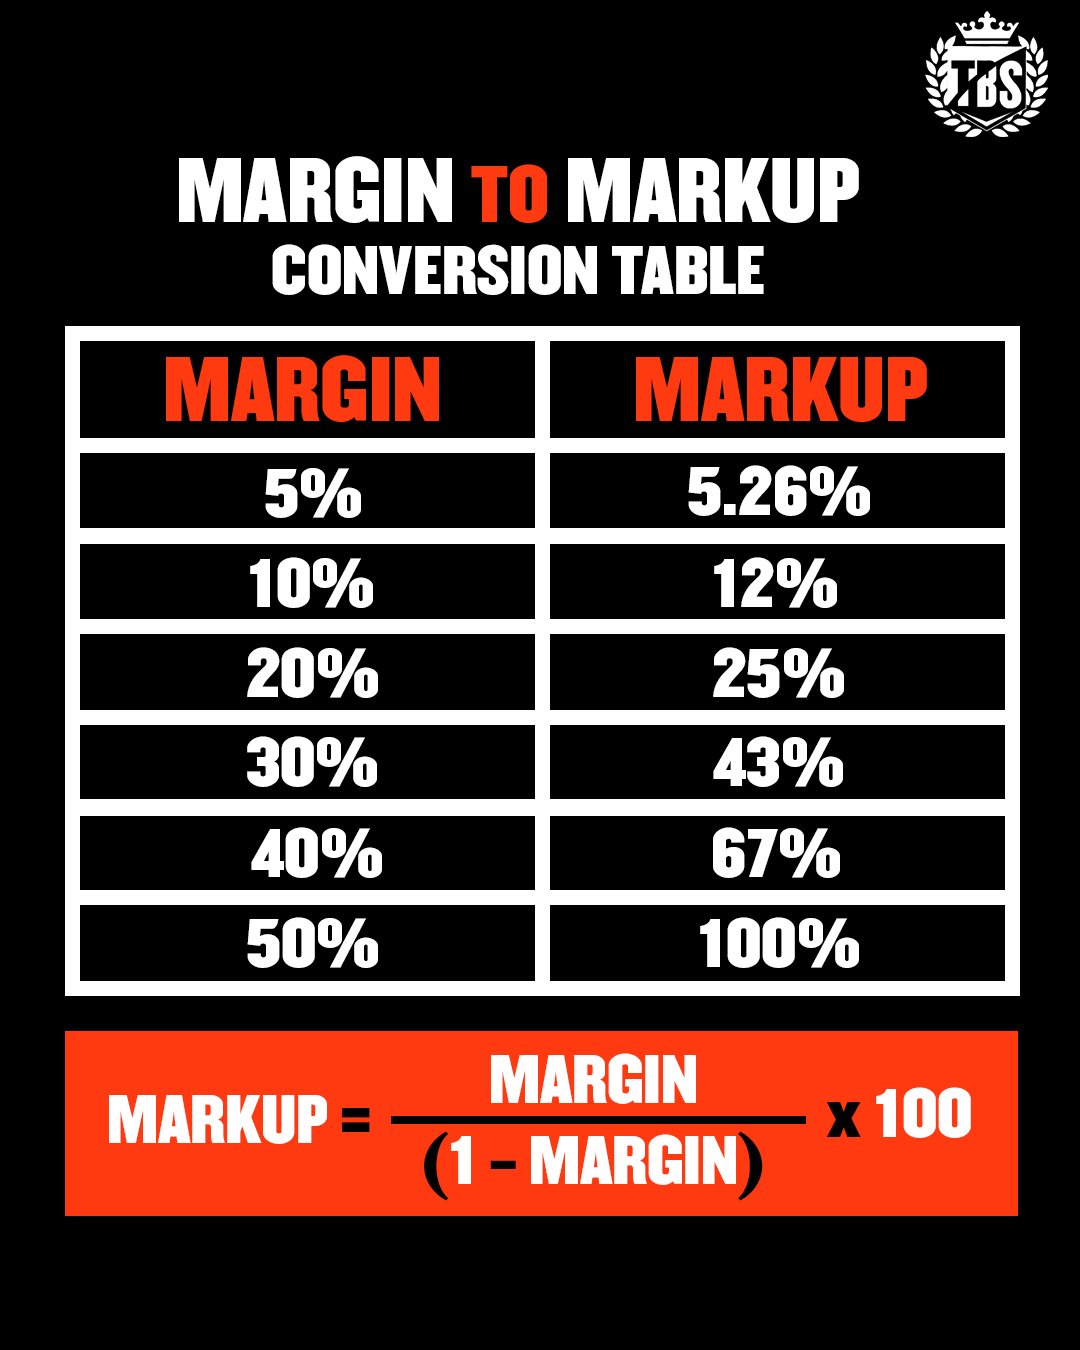 Margin to Markup conversion table.